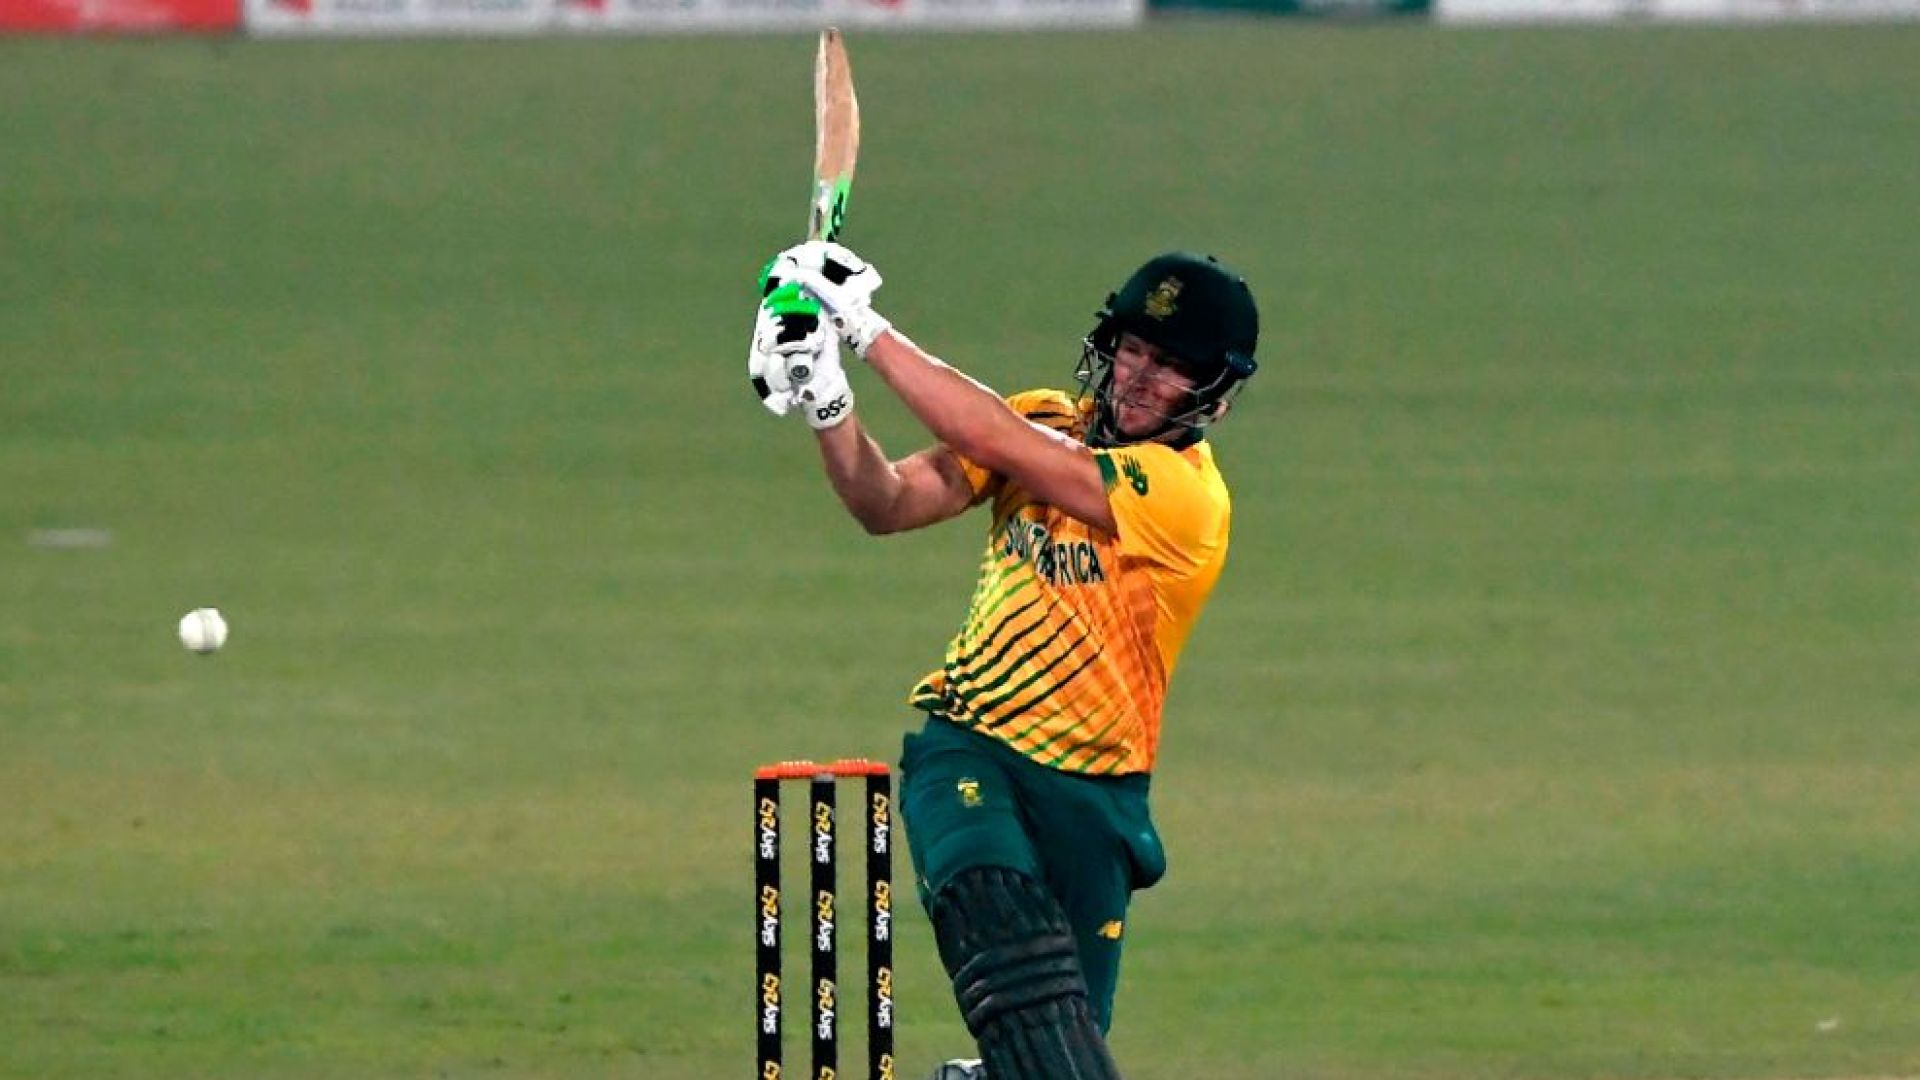 IRE vs SA: Proteas clinch series after Miller saves the day with the bat 